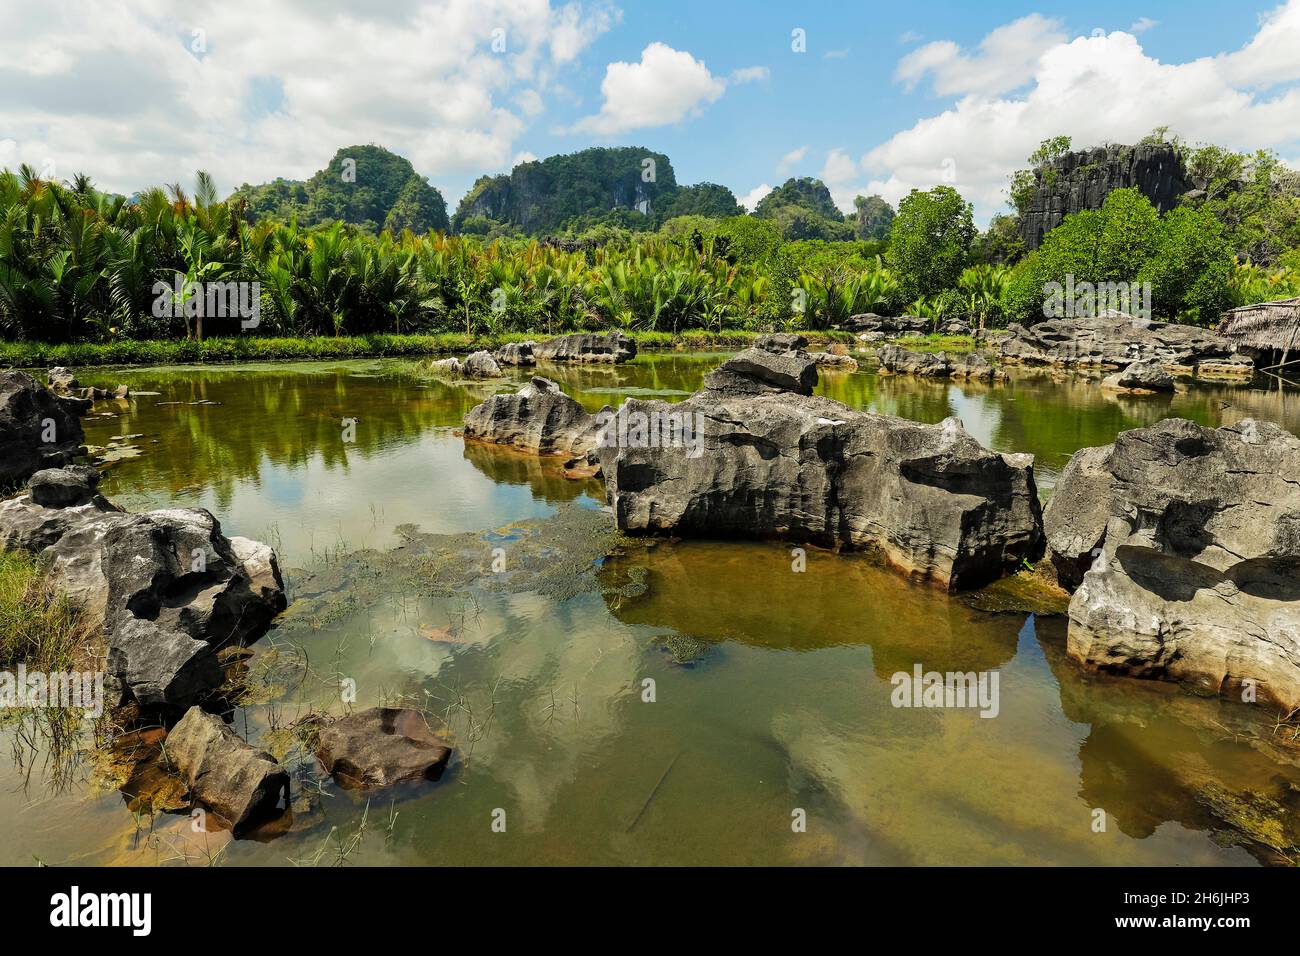 Typical eroded limestone outcrops and lake in karst region, Rammang-Rammang, Maros, South Sulawesi, Indonesia, Southeast Asia, Asia Stock Photo